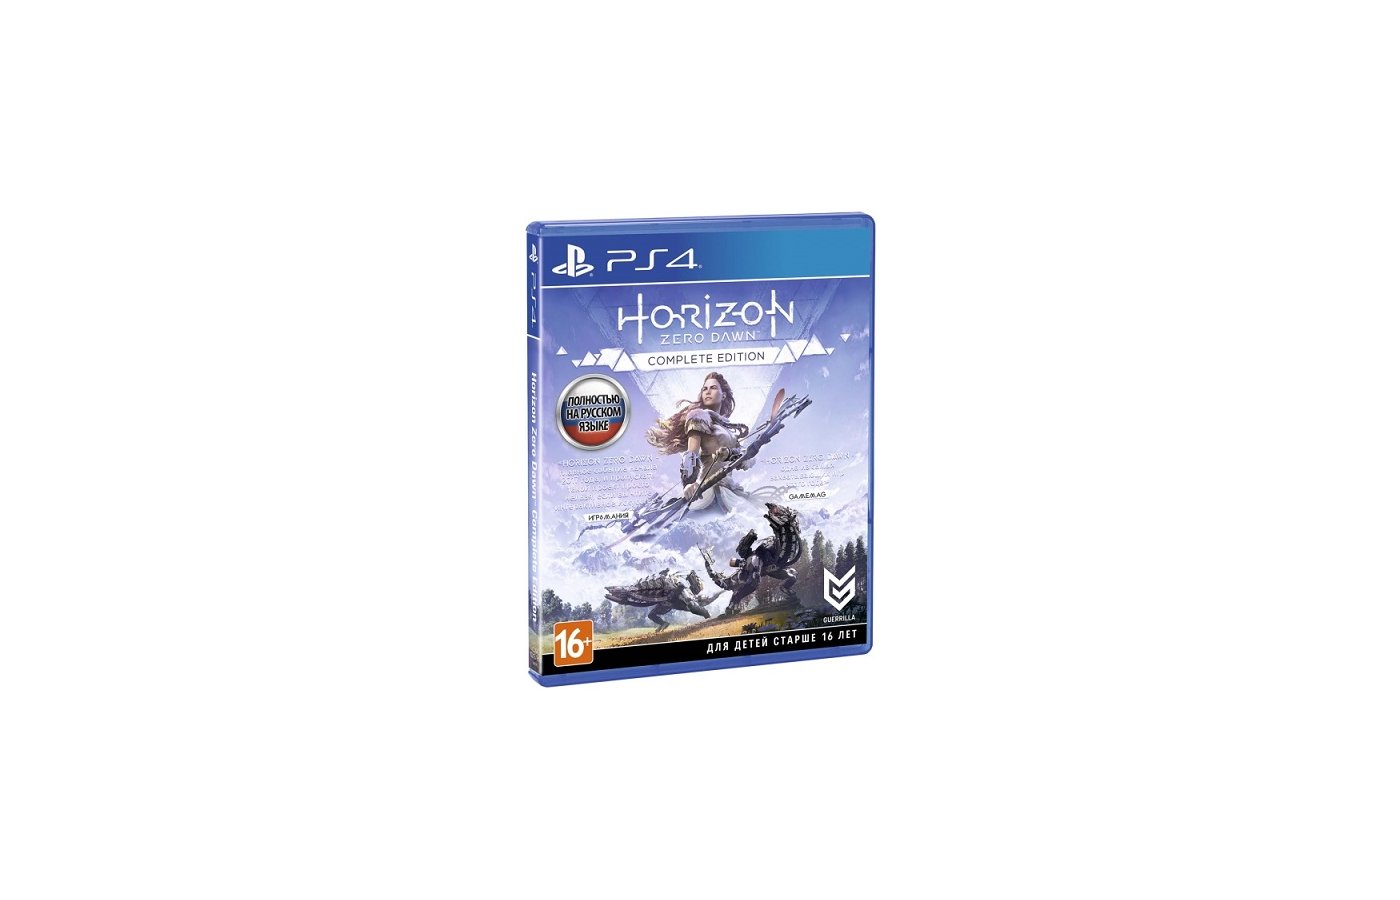 Complete edition game. Диск для ps4 Horizon Zero. Horizon Zero down complete Edition ps4 диск. Horizon Zero Dawn complete Edition ps4. Horizon Zero Dawn диск пс4.